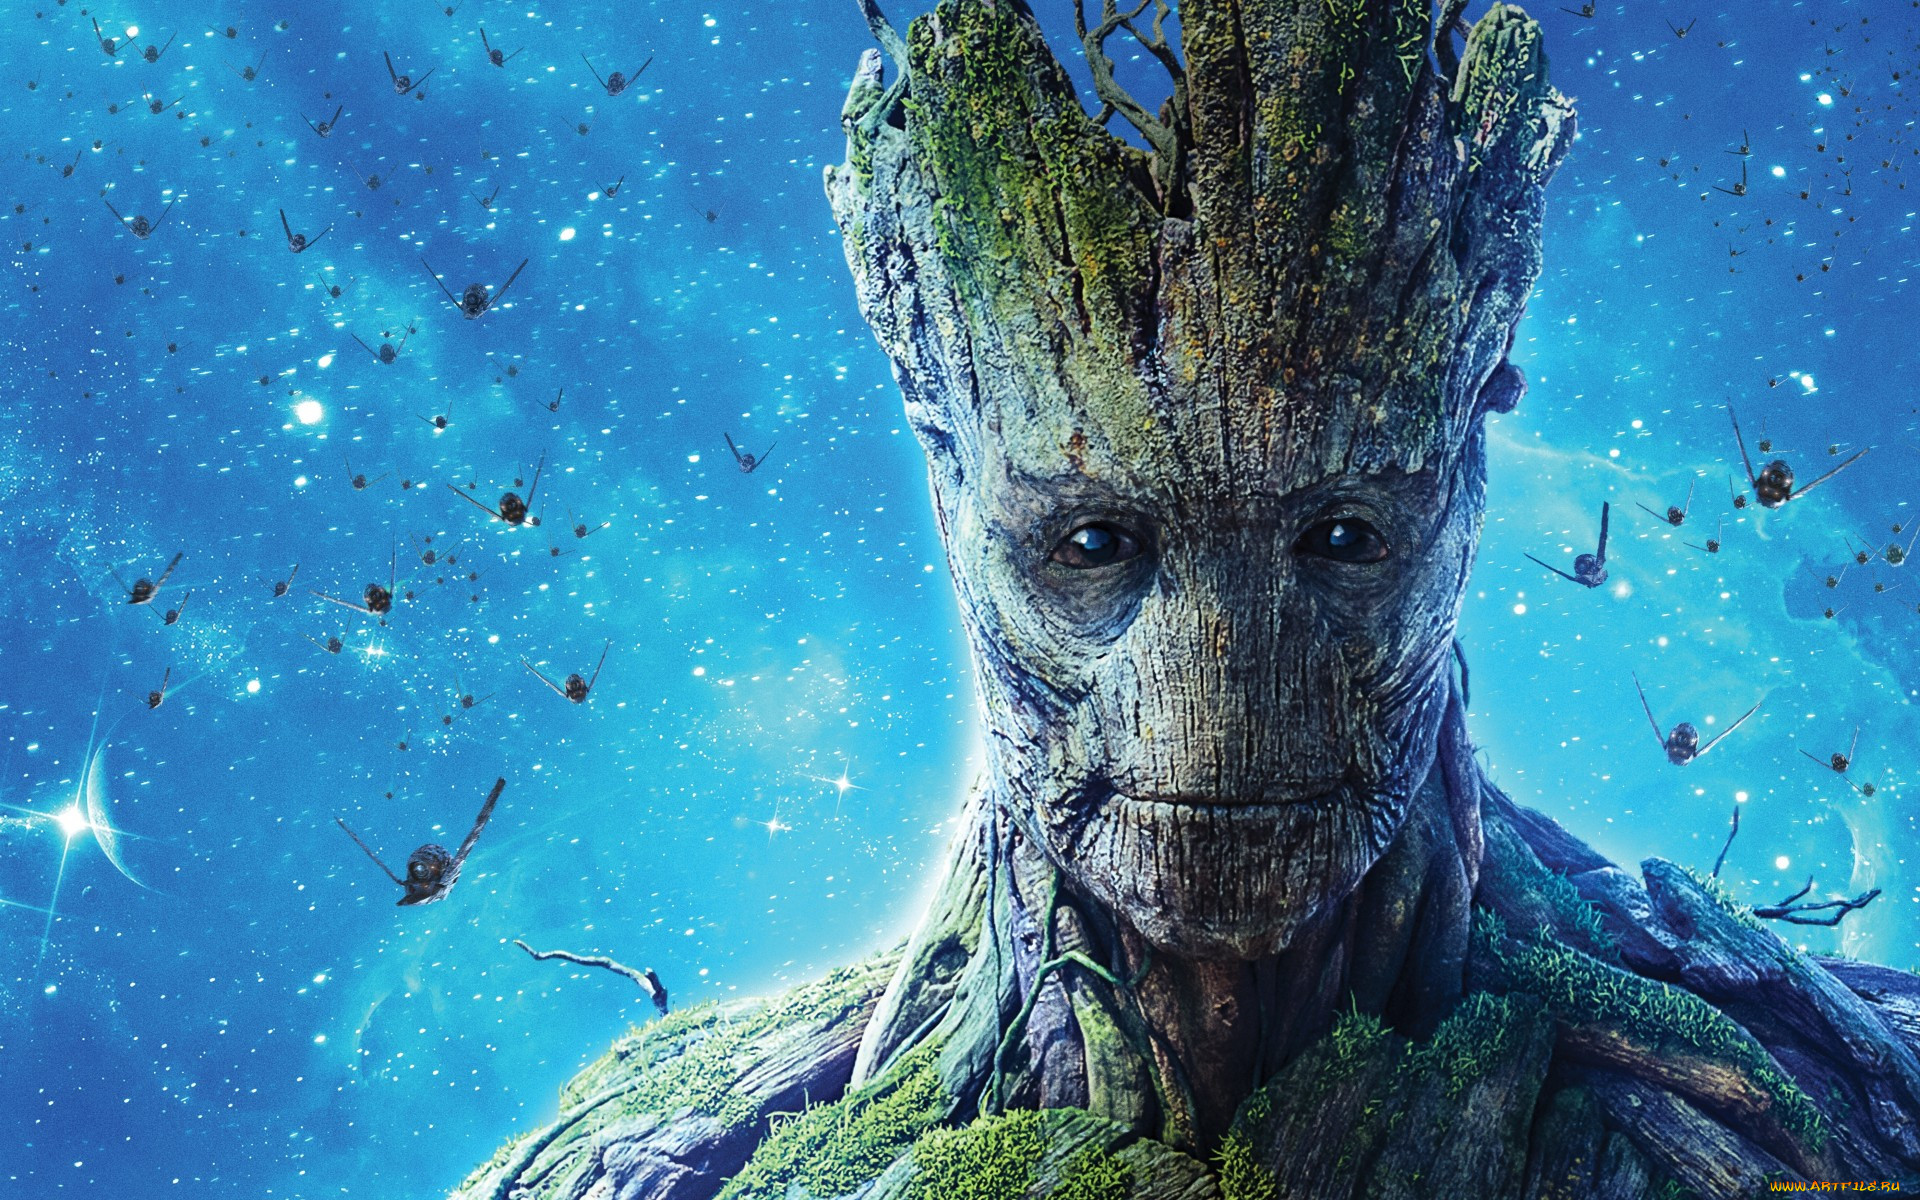  , guardians of the galaxy, groot